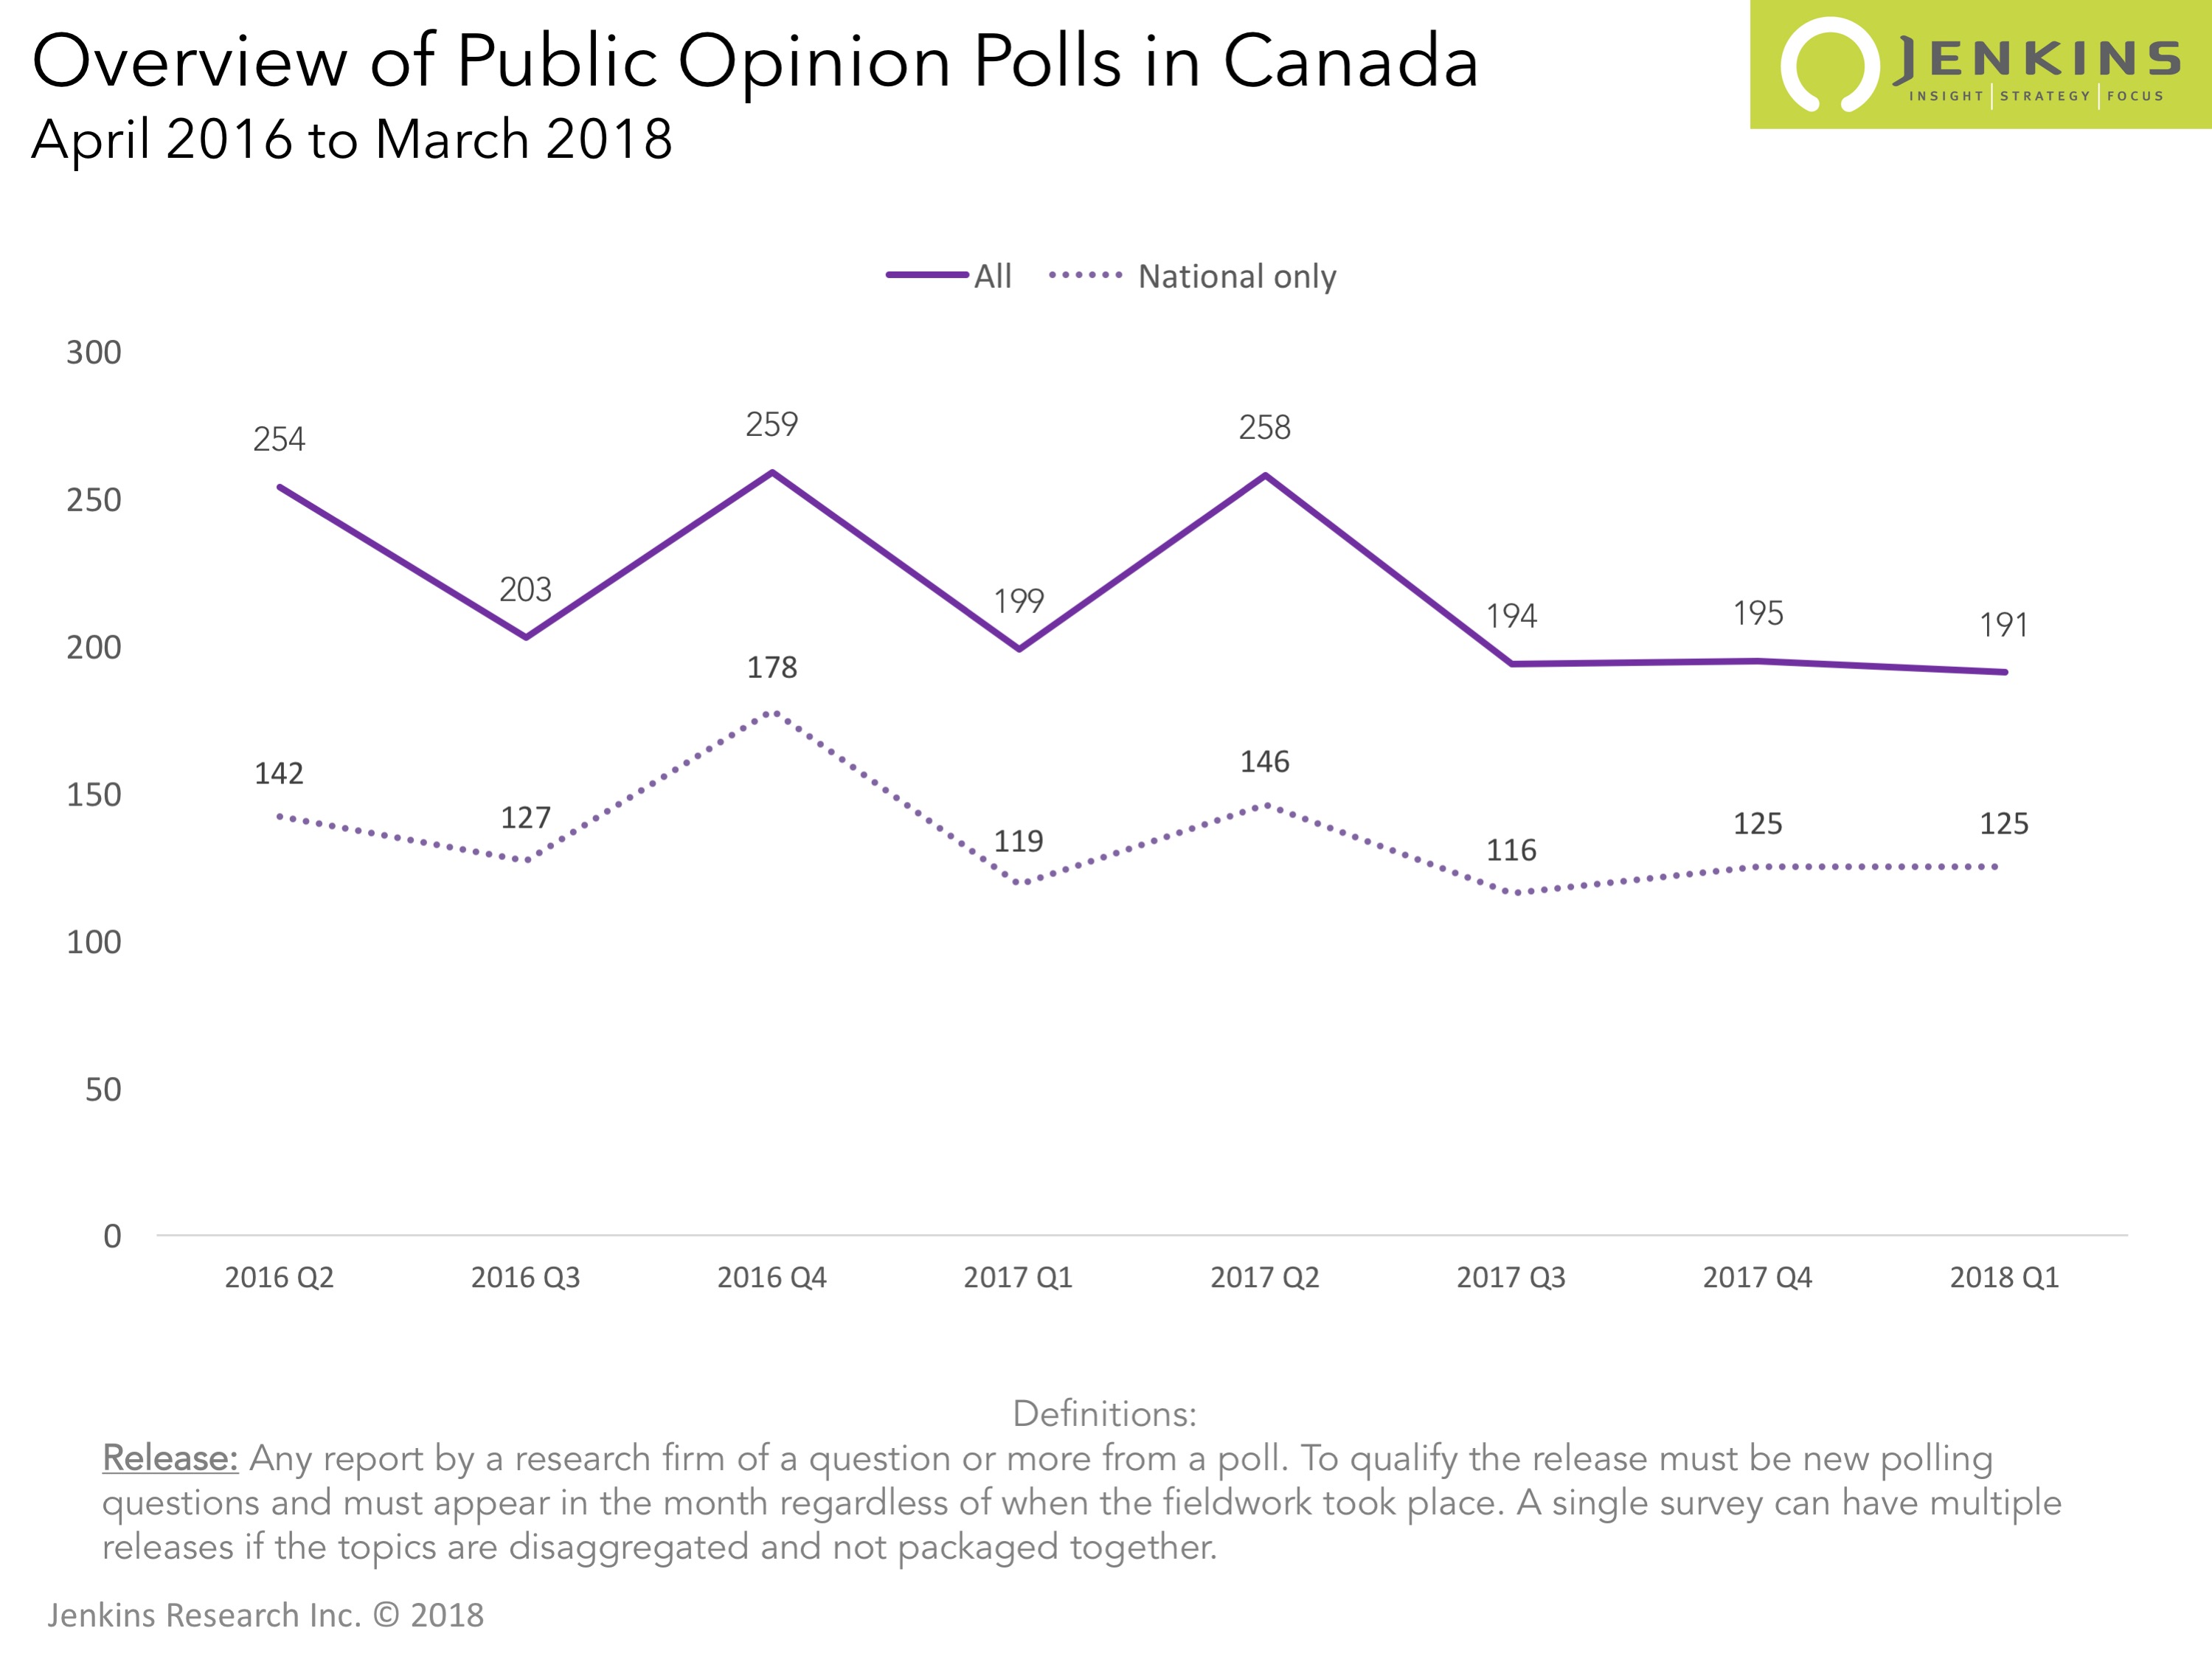 More and more polling about non-policy issues | 2018 Q1 Publicly Released Polls